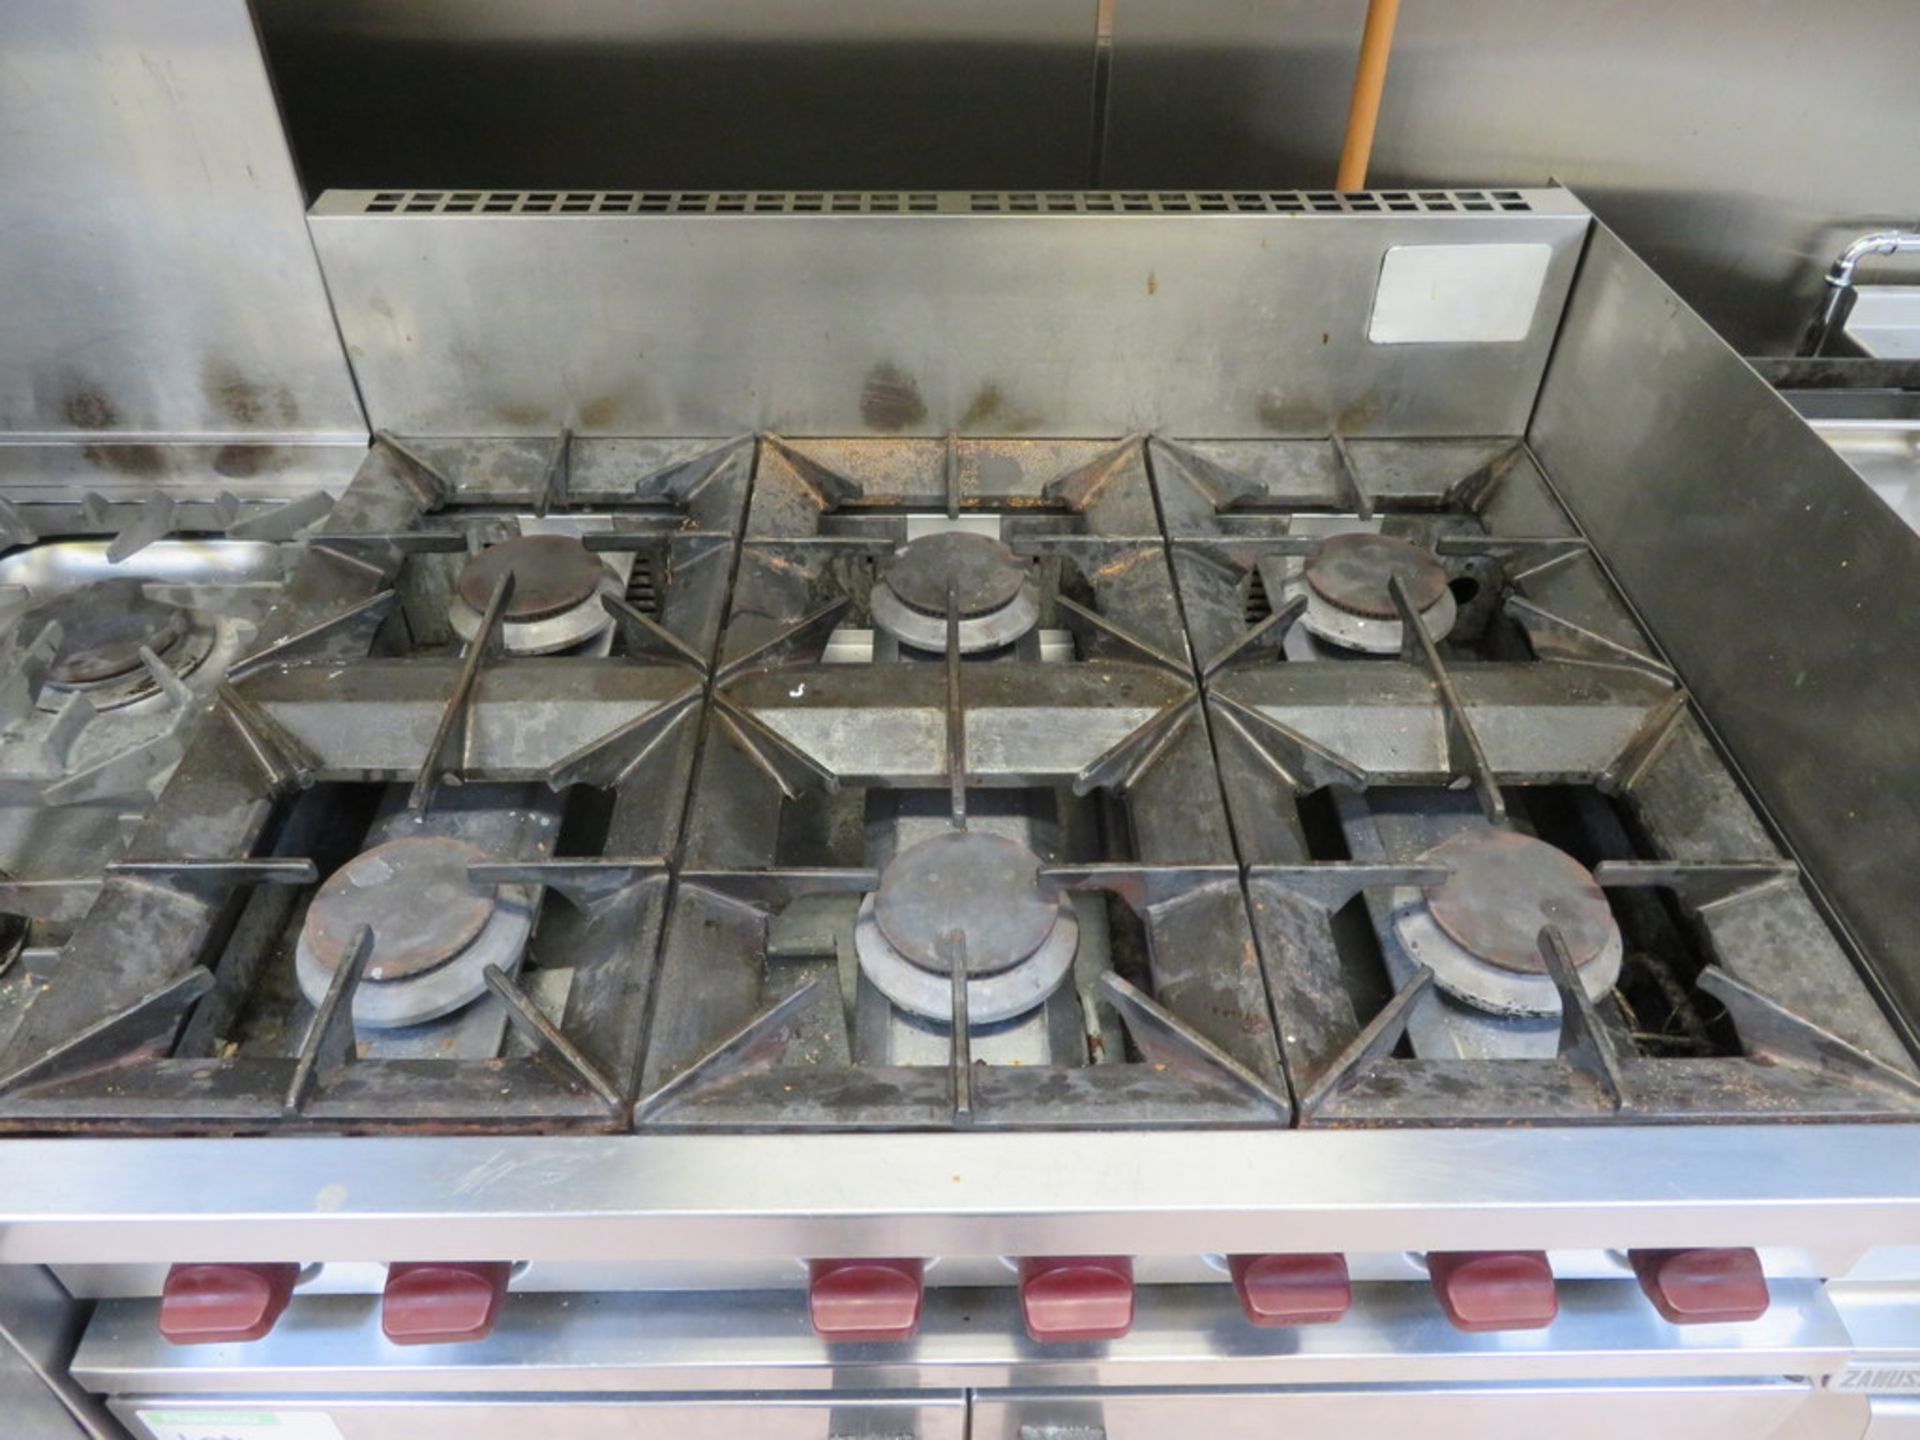 STAINLESS STEEL SIX BURNER GAS HOB AND DOUBLE DOOR OVEN - Image 2 of 3